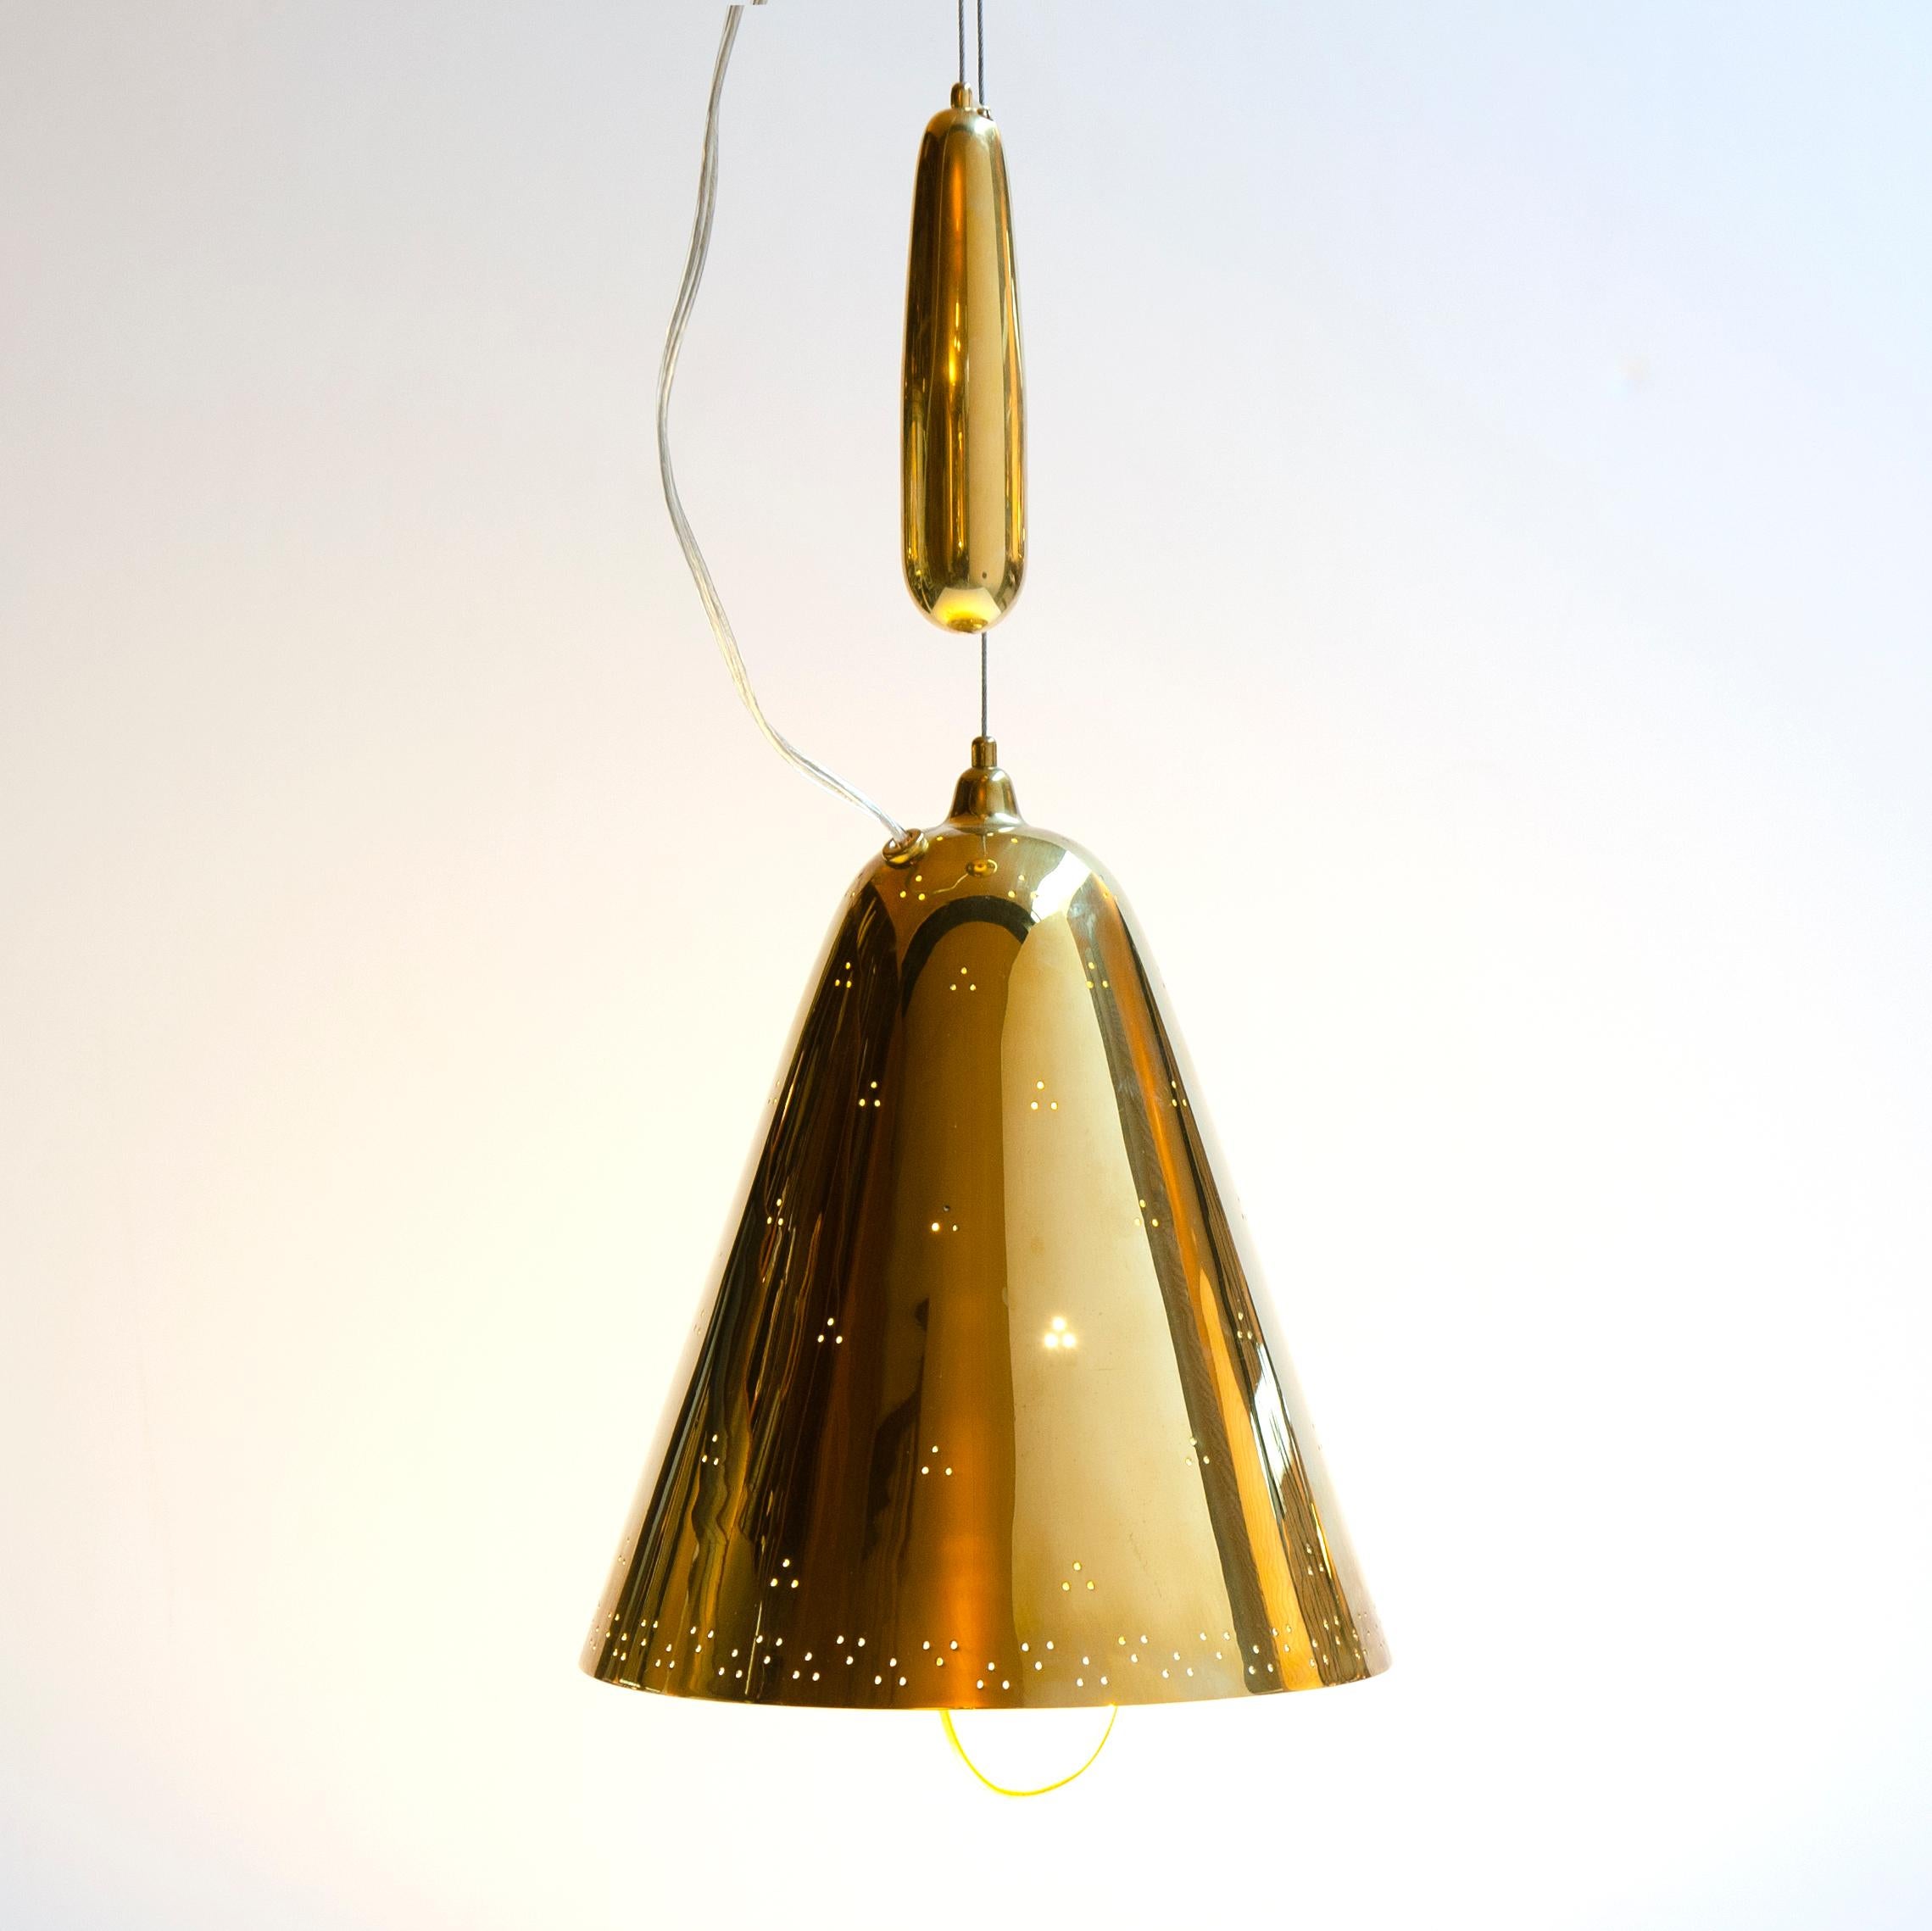 An uncommon and masterful adjustable counterweighted ceiling fixture having a brass bell-shaped dome with pin-hole perforations.